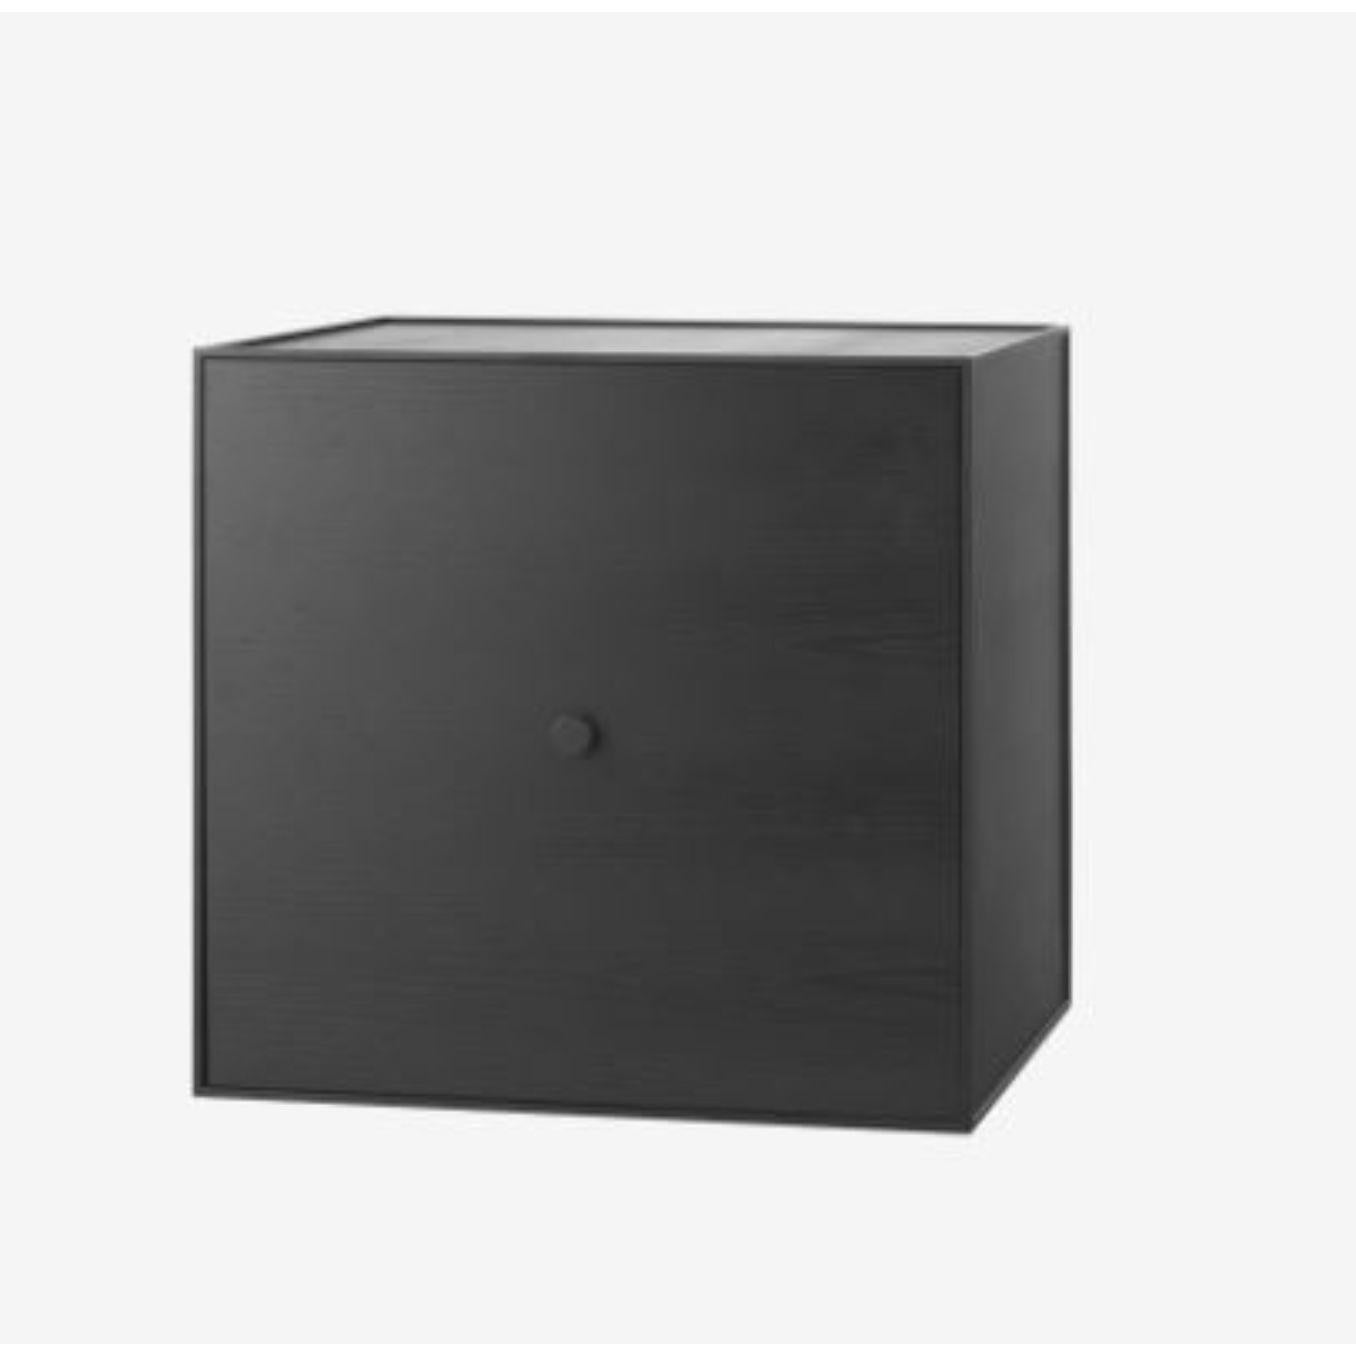 49 Black ash frame box with door / shelf by Lassen.
Dimensions: D 49 x W 42 x H 49 cm 
Materials: Finér, Melamin, Melamin, Melamine, Metal, Veneer, Ash
Also available in different colours and dimensions. 
Weight: 17 Kg


By Lassen is a Danish